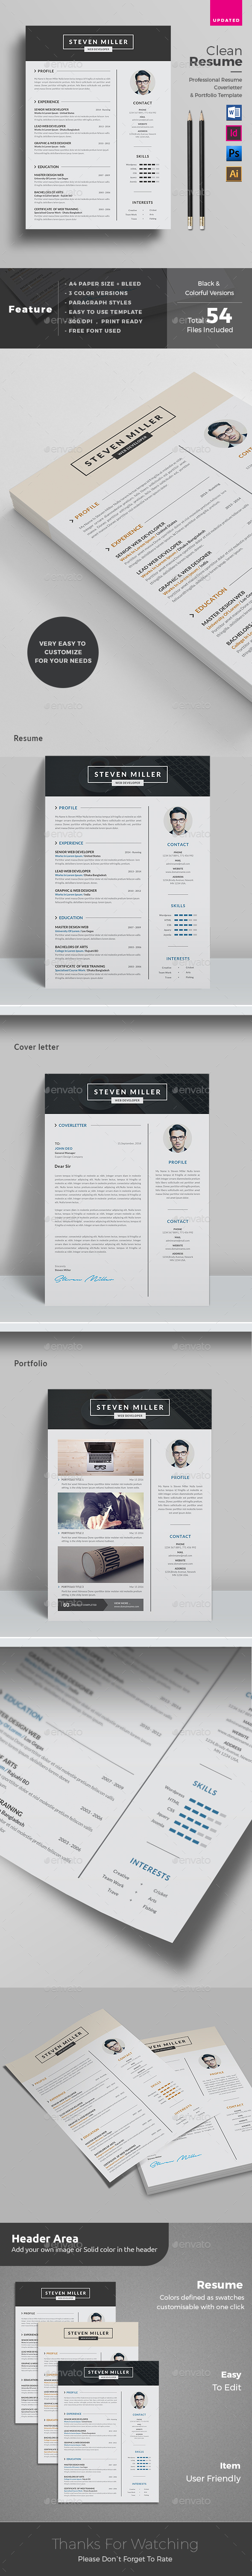 downloadable resume templates